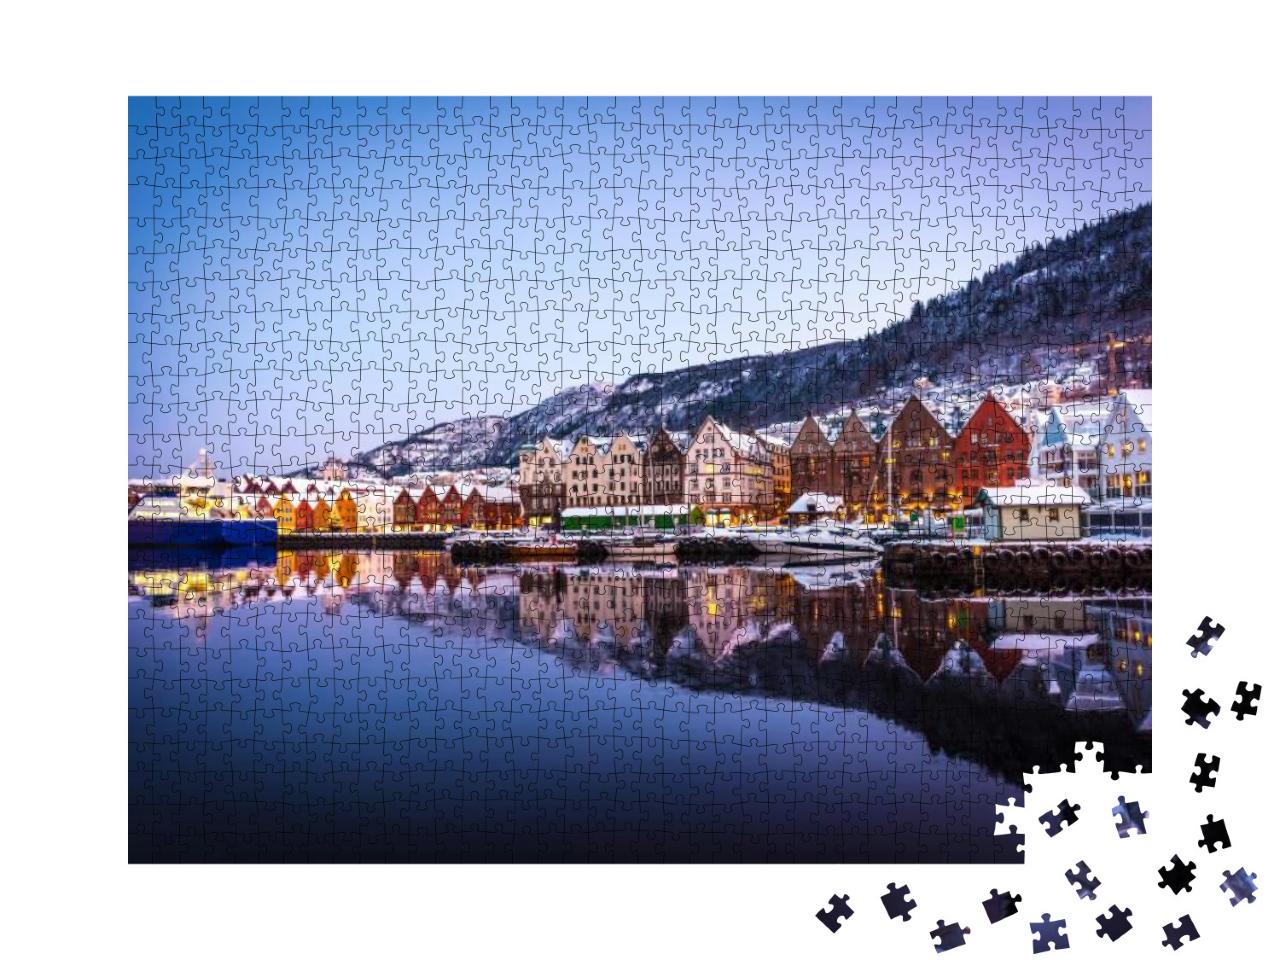 Bergen, Norway - December 27, 2014 Famous Bryggen Street... Jigsaw Puzzle with 1000 pieces